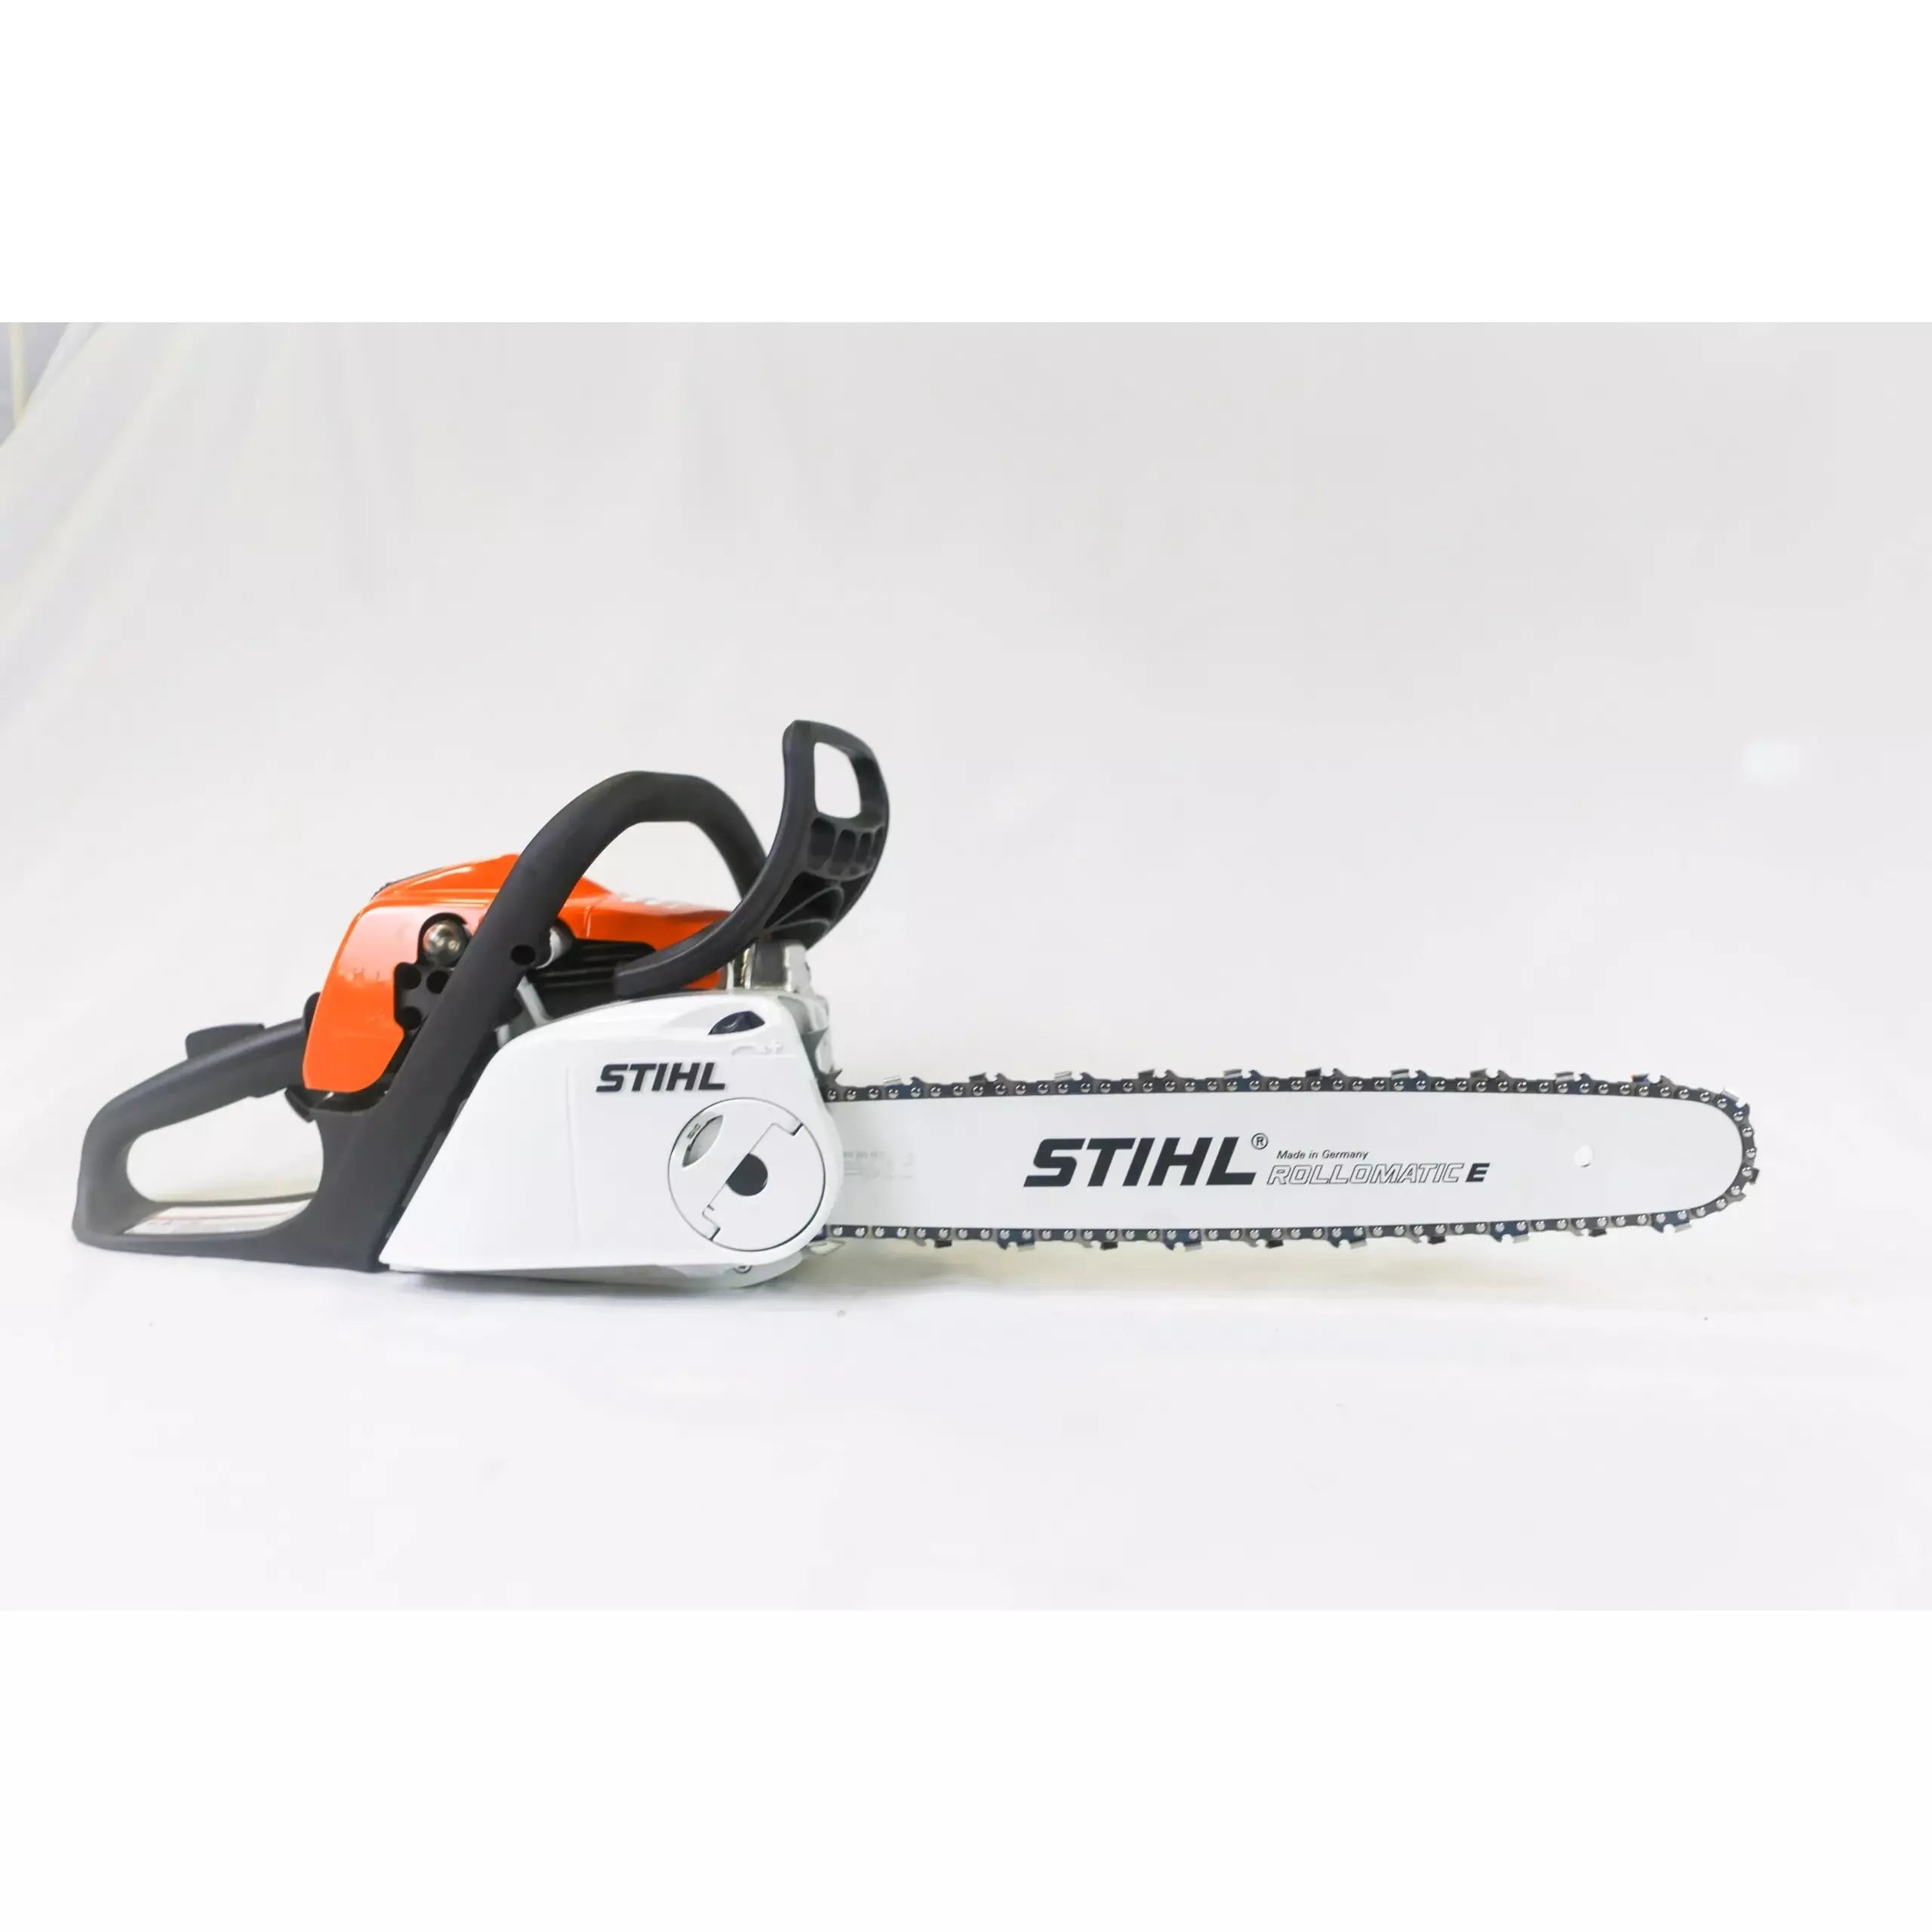 STIHL MS 211 C-BE 18 in. 35.2 cc Gas Chainsaw